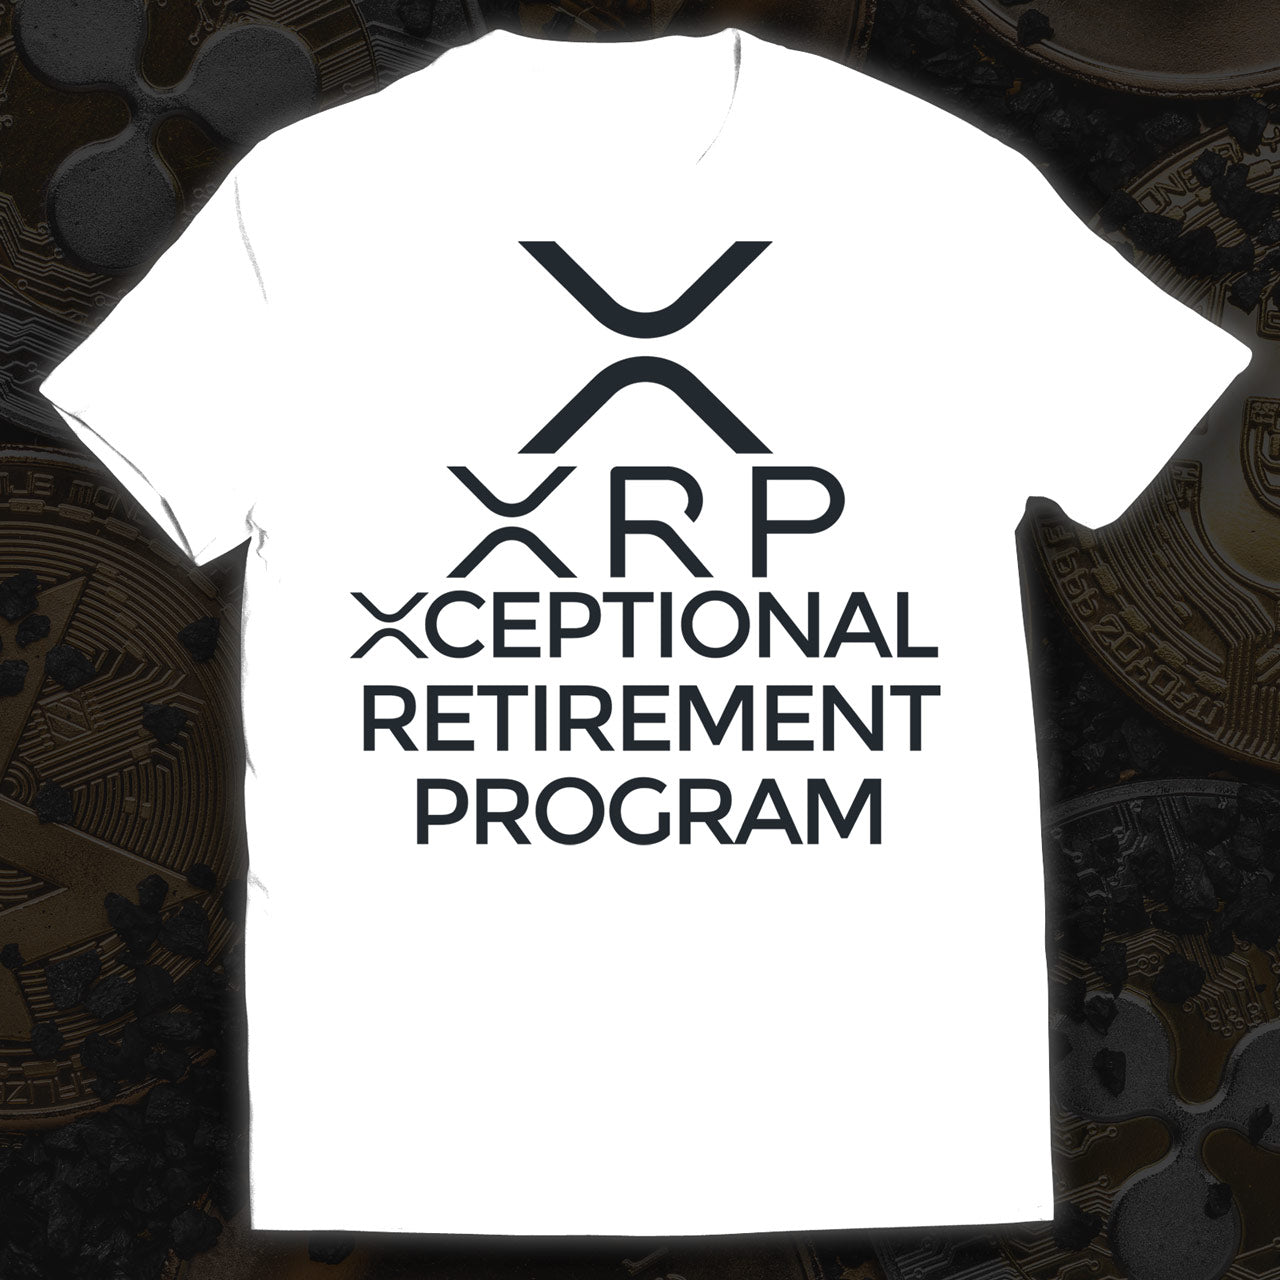 XRP - Xceptional Retirement Program | Cryptomania | Cryptocurrency T-Shirt